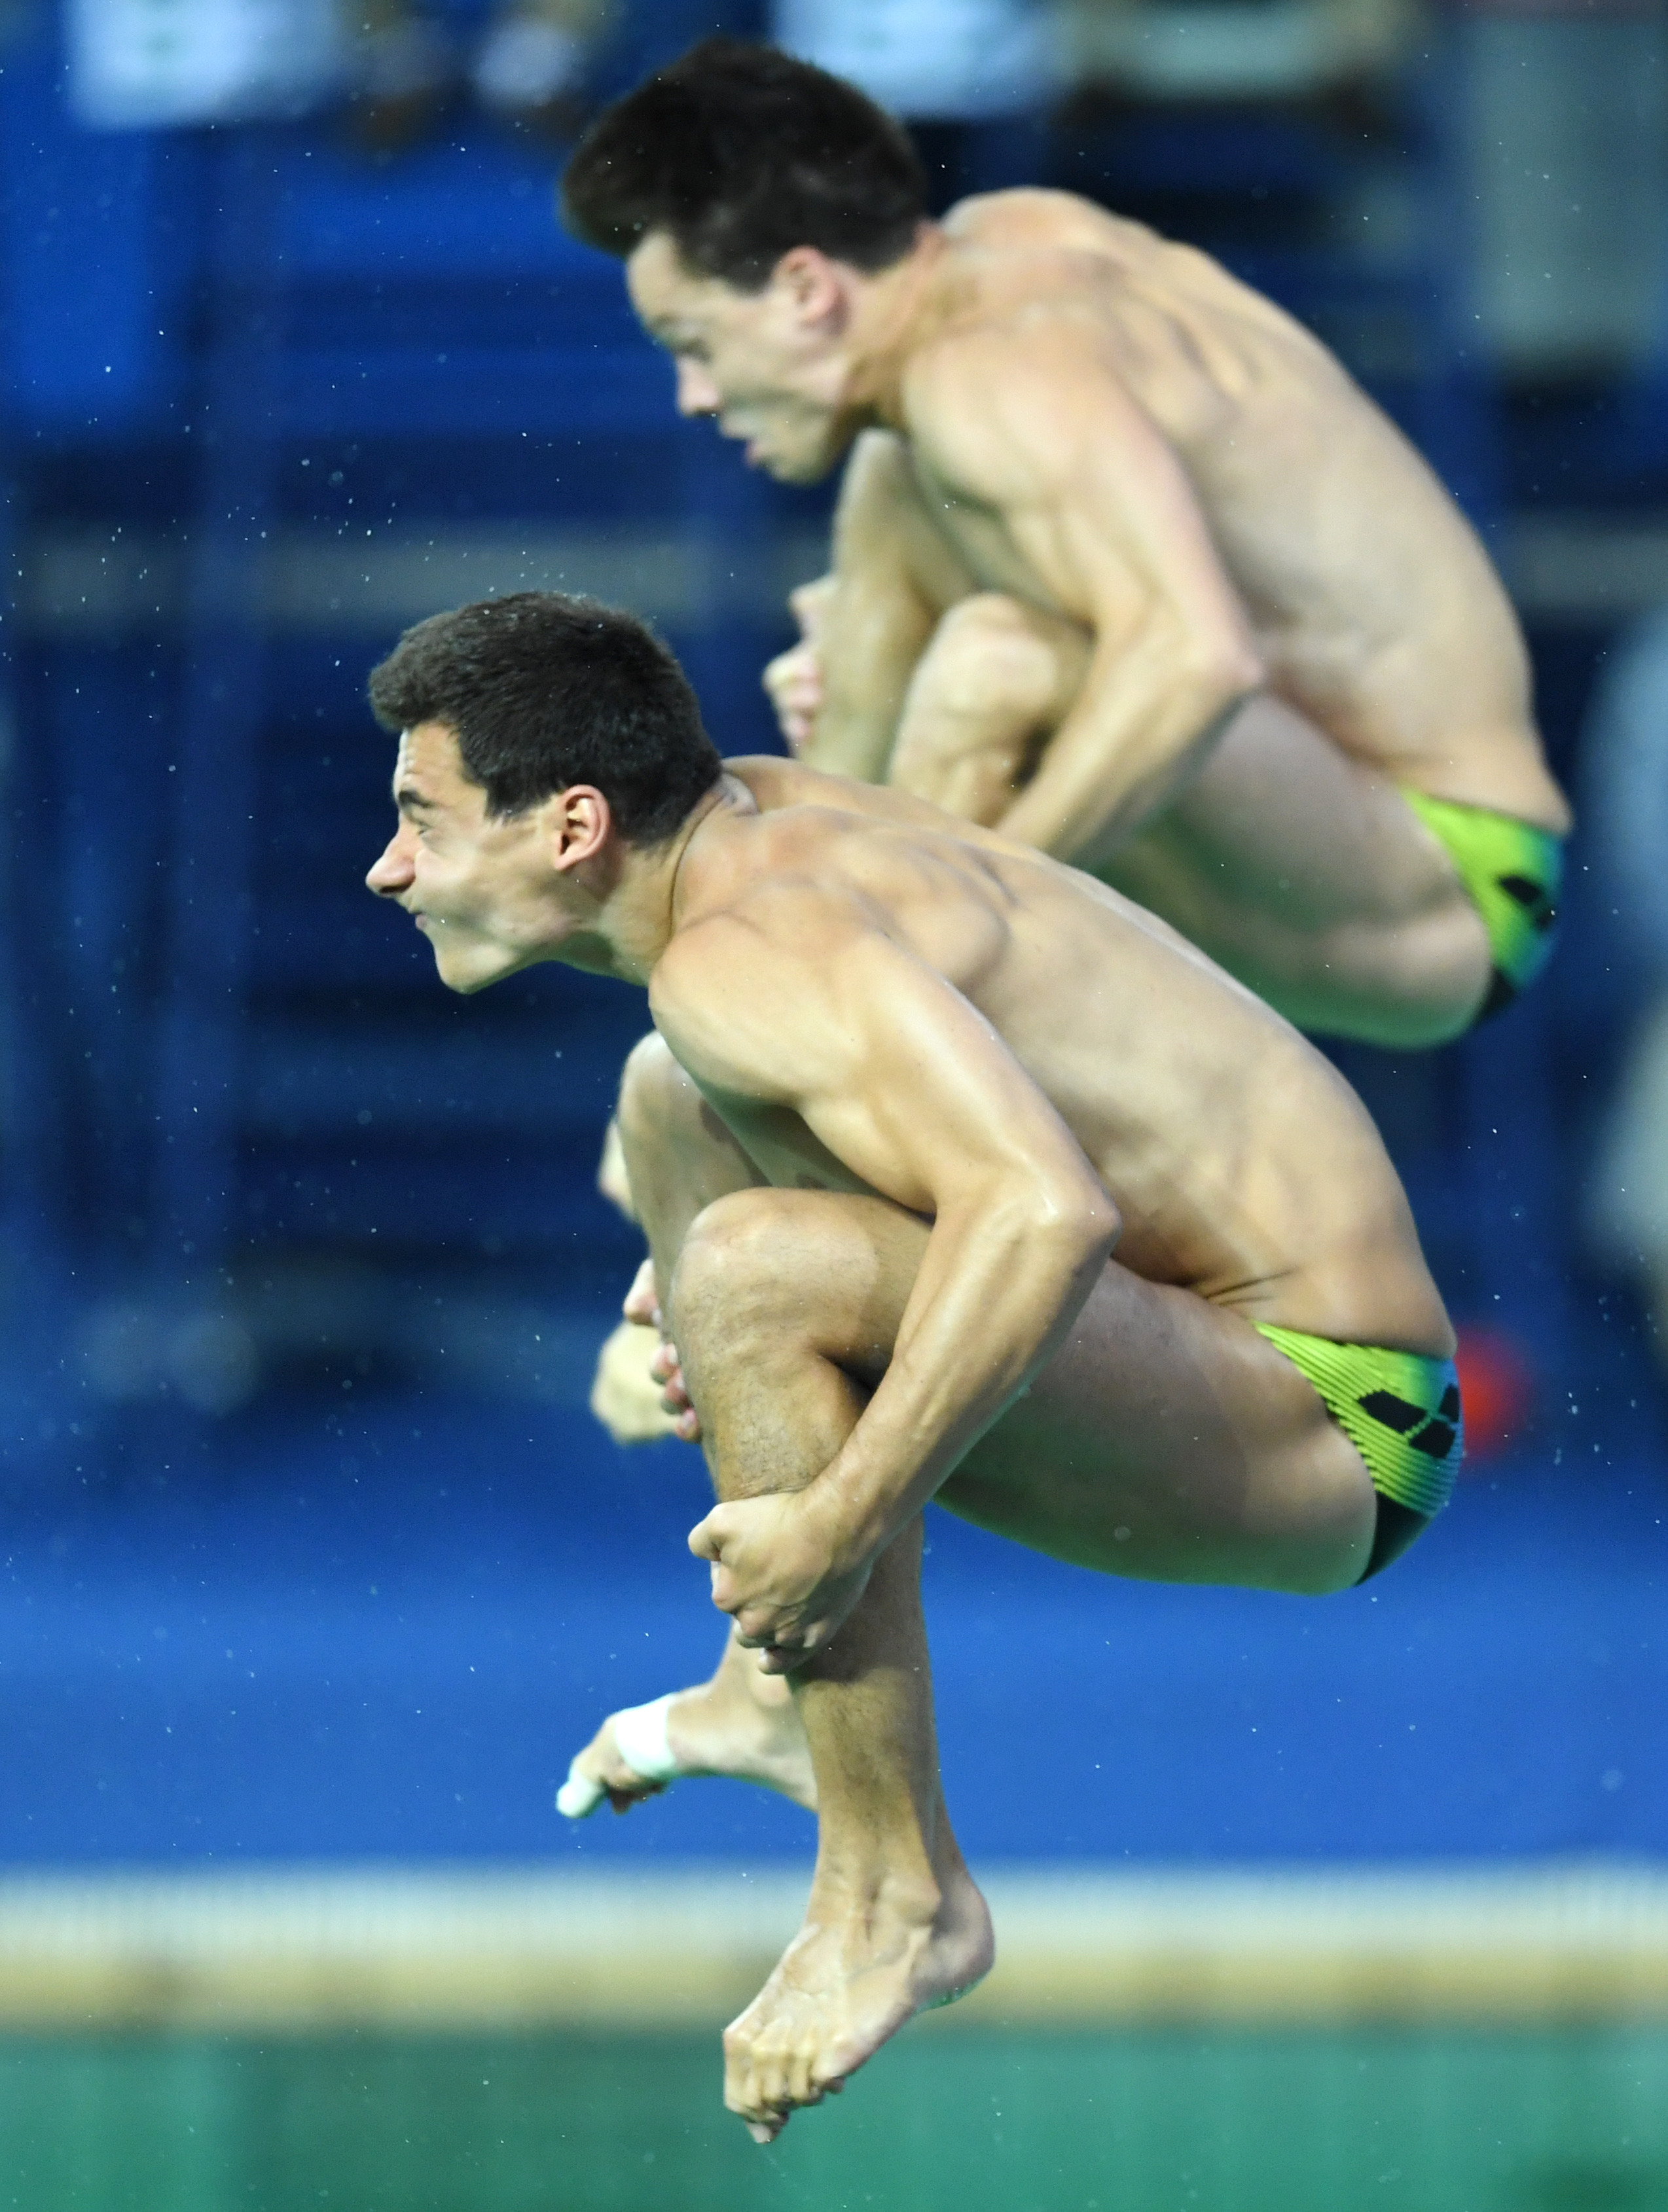 These HILARIOUS Pictures Of Olympic Athletes Are Guaranteed To Make You LOL! - Heart2548 x 3380